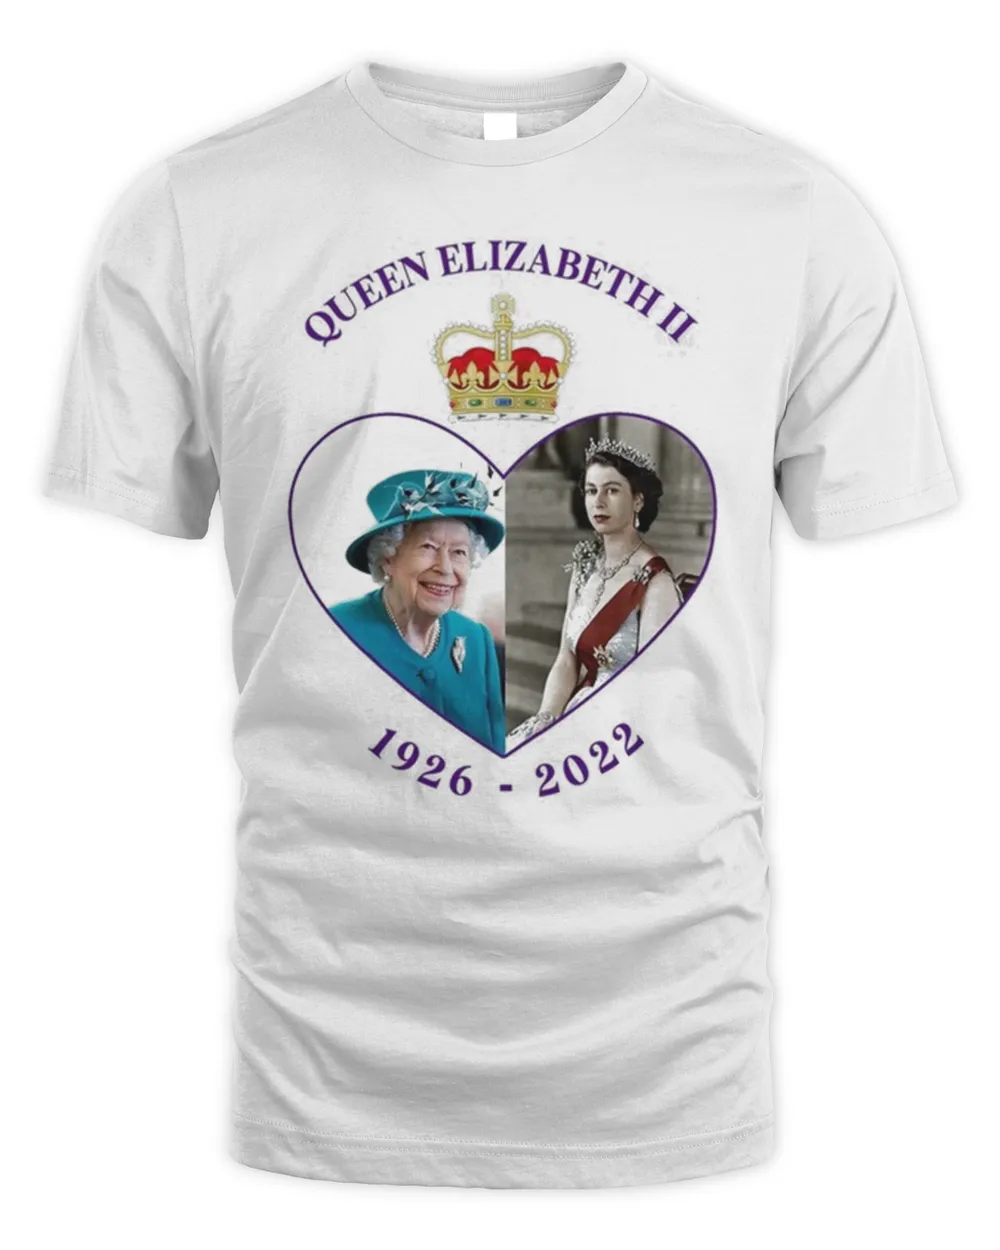 Rest In Peace Elizabeth RIP Queen of England 1926-2022 Shirt